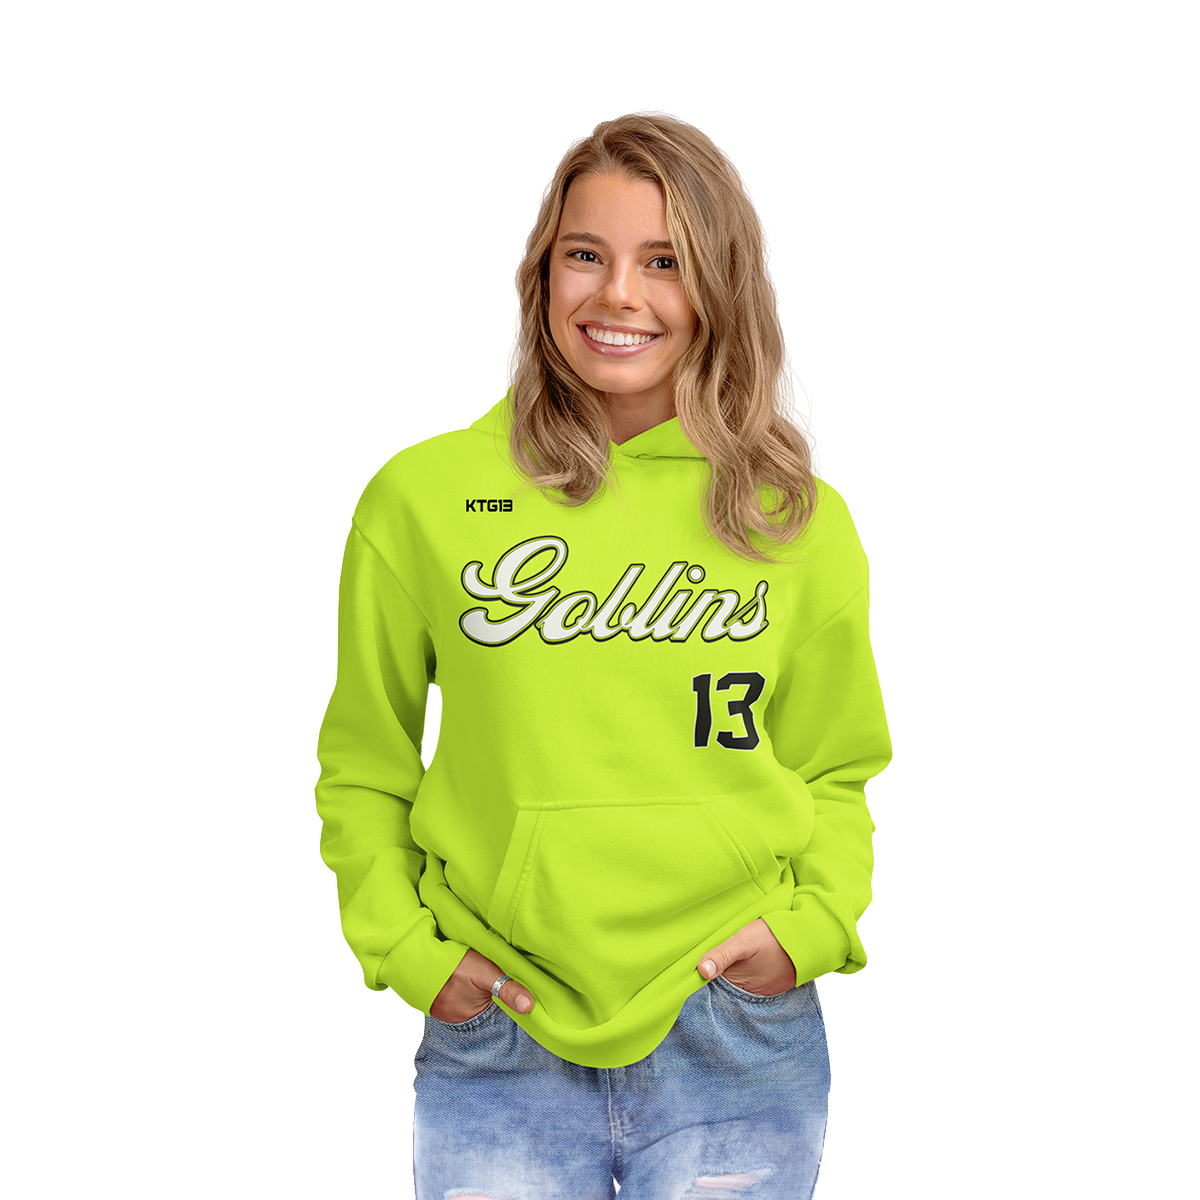 KTG13 TV The Show Green Goblins Home Jersey Hoodie